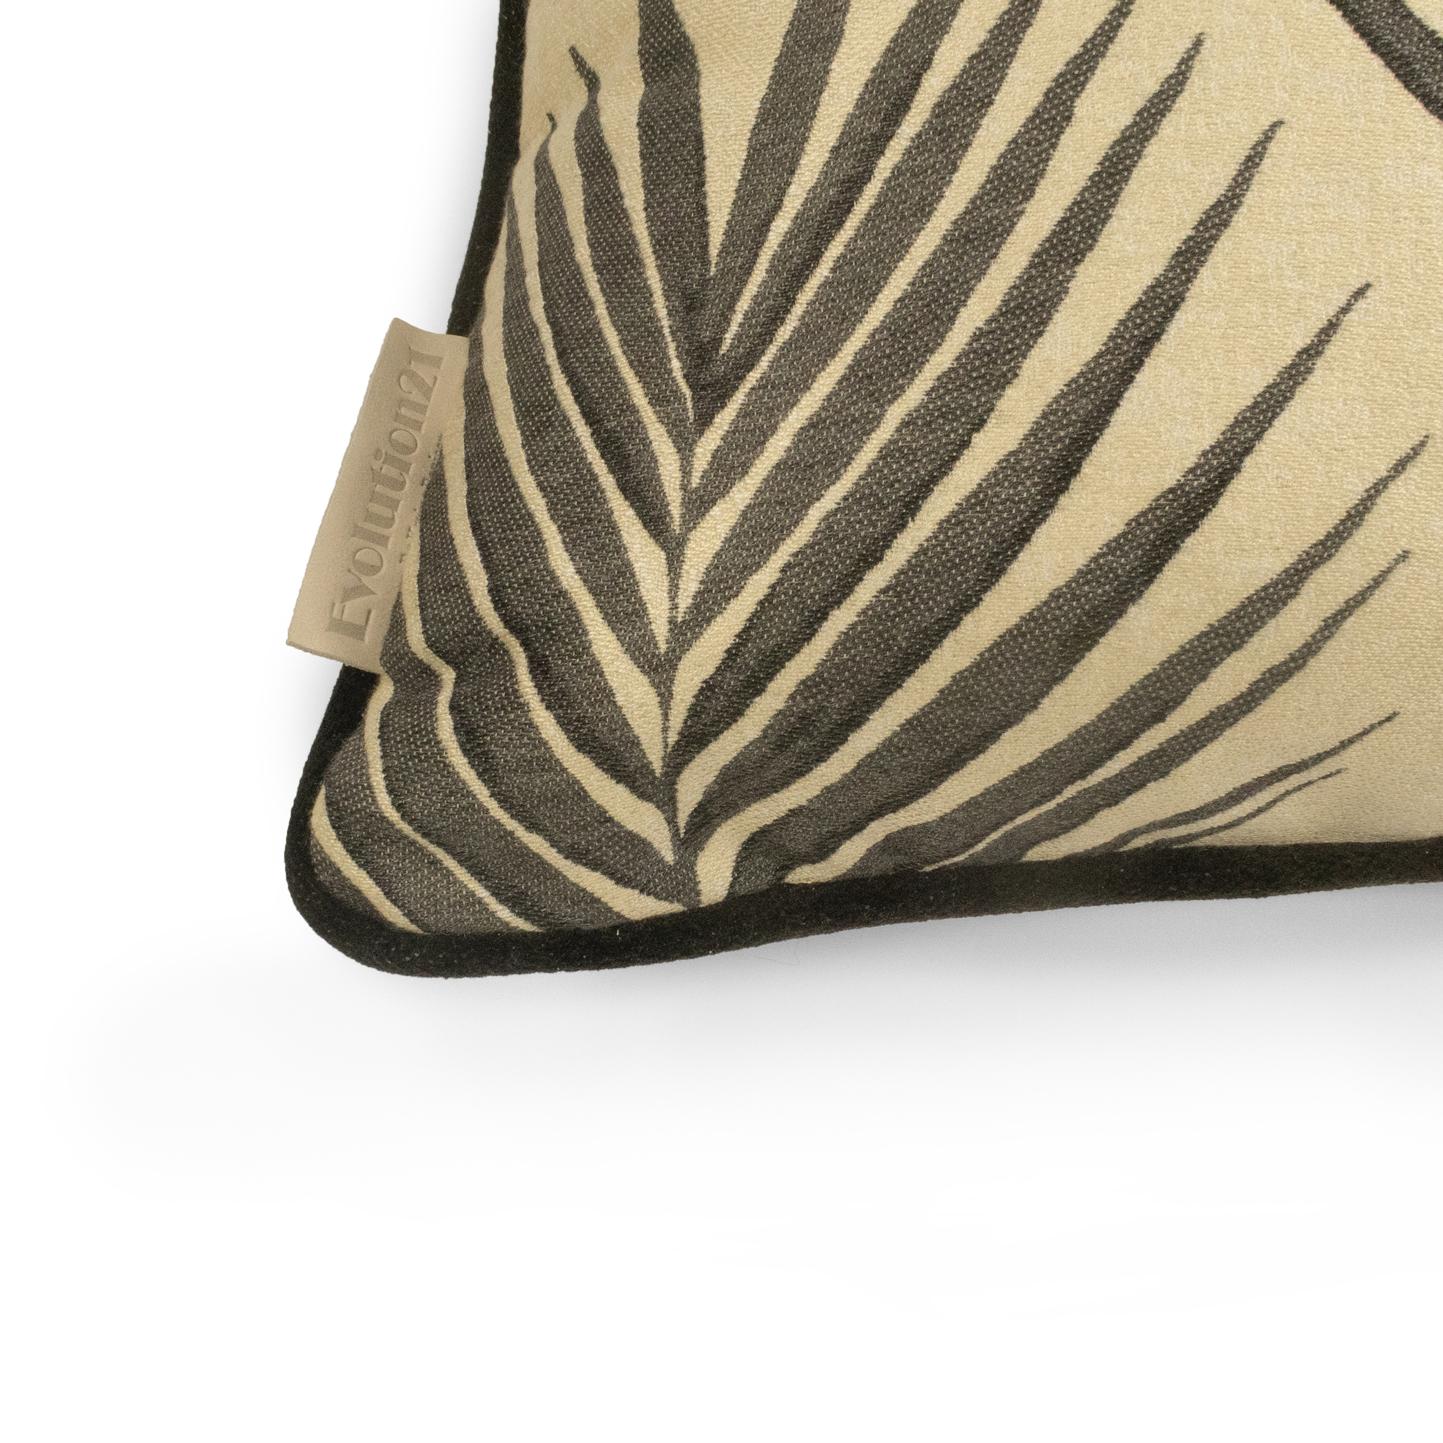 Belgian Cushion / Pillow Patterned Bamboo Leaf Greyback by Evolution21 For Sale